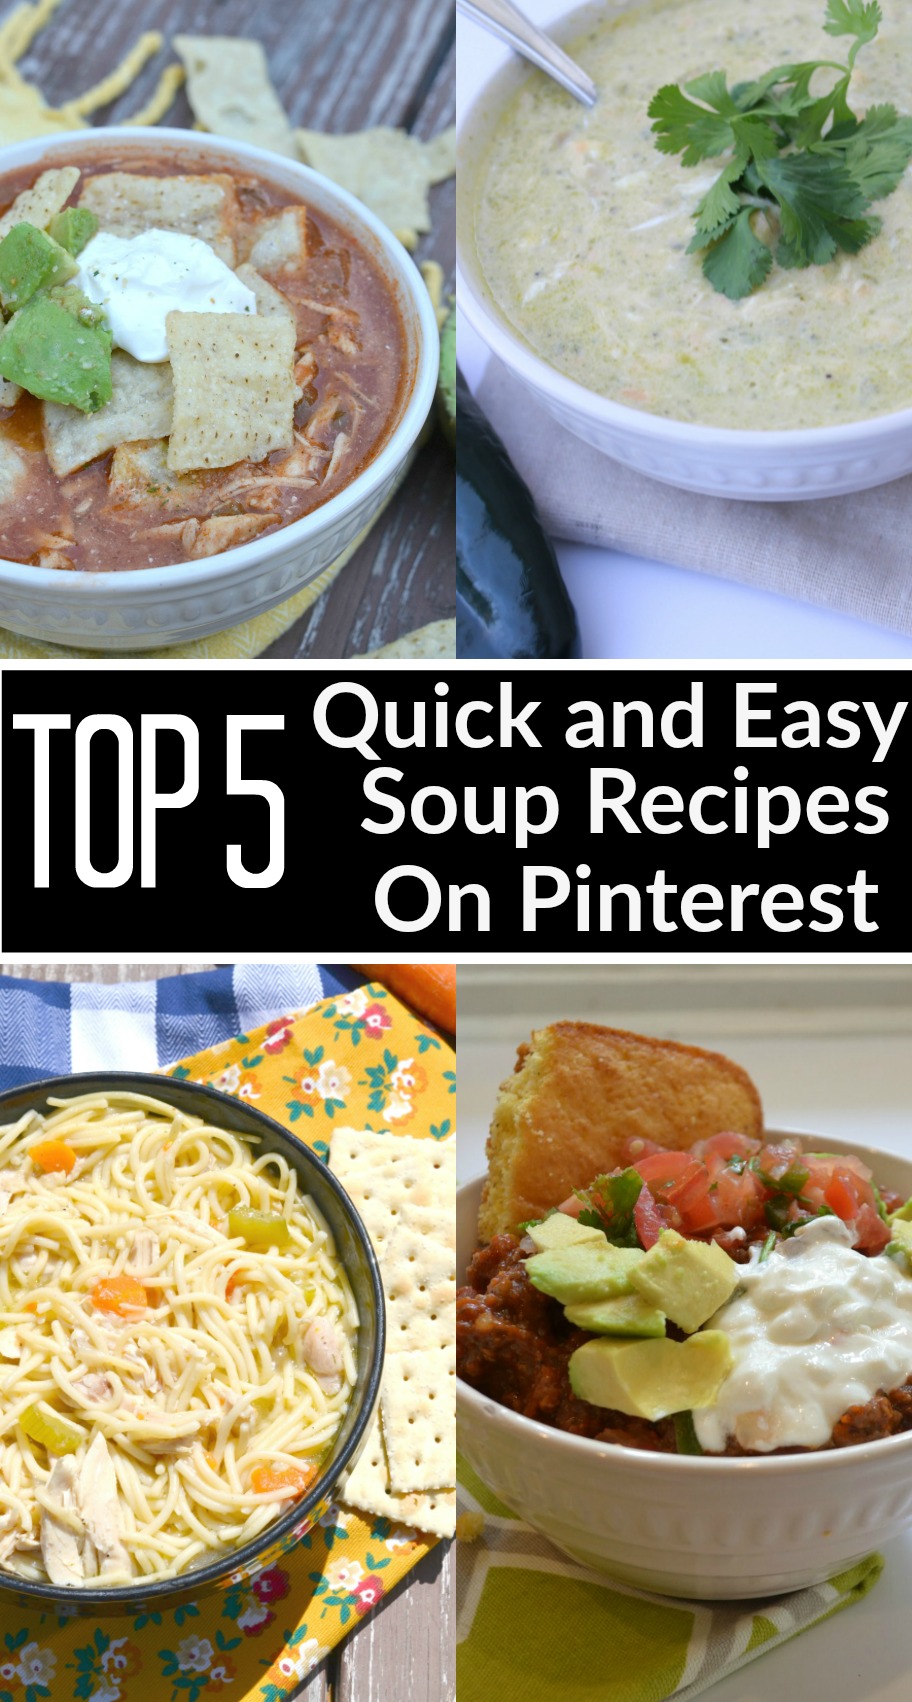 Top 5 Quick and Easy Soup Recipes on Pinterest